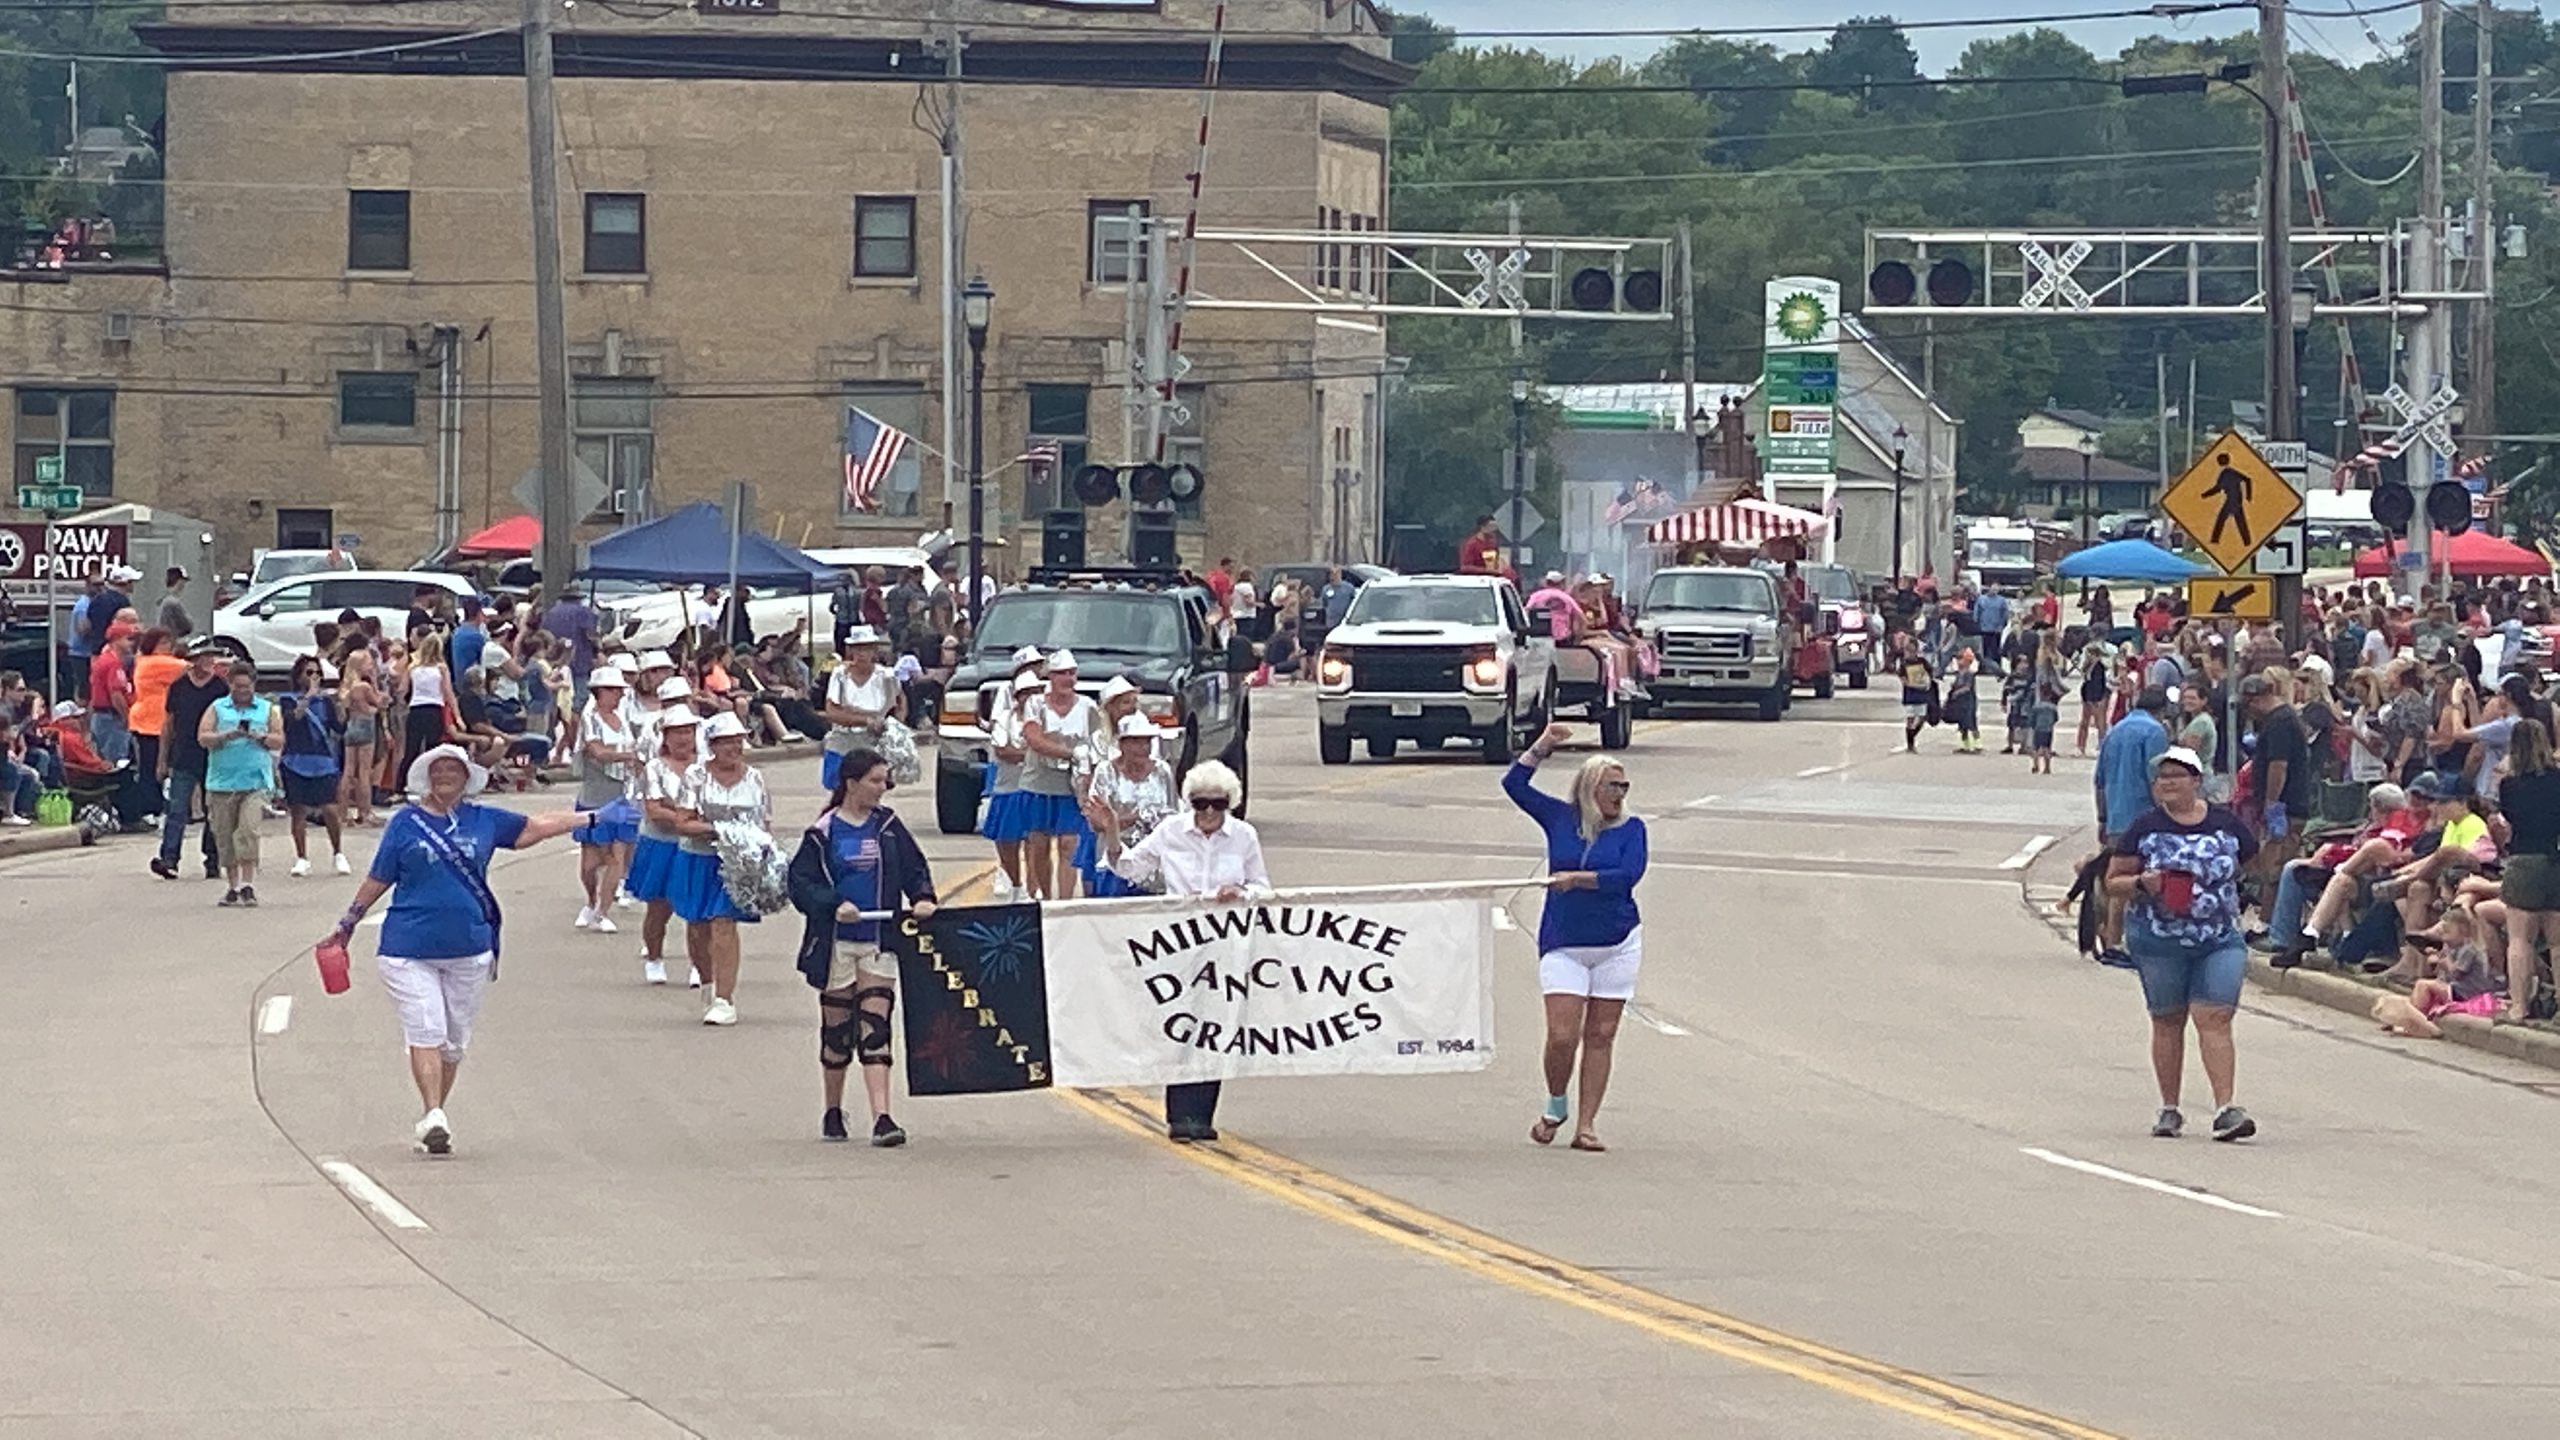 Two women hold a banner in the center of the image that reads "Milwaukee Dancing Grannies" with performers behind them. They hold pom poms and perform to music as part of the annual Allenton Parade.